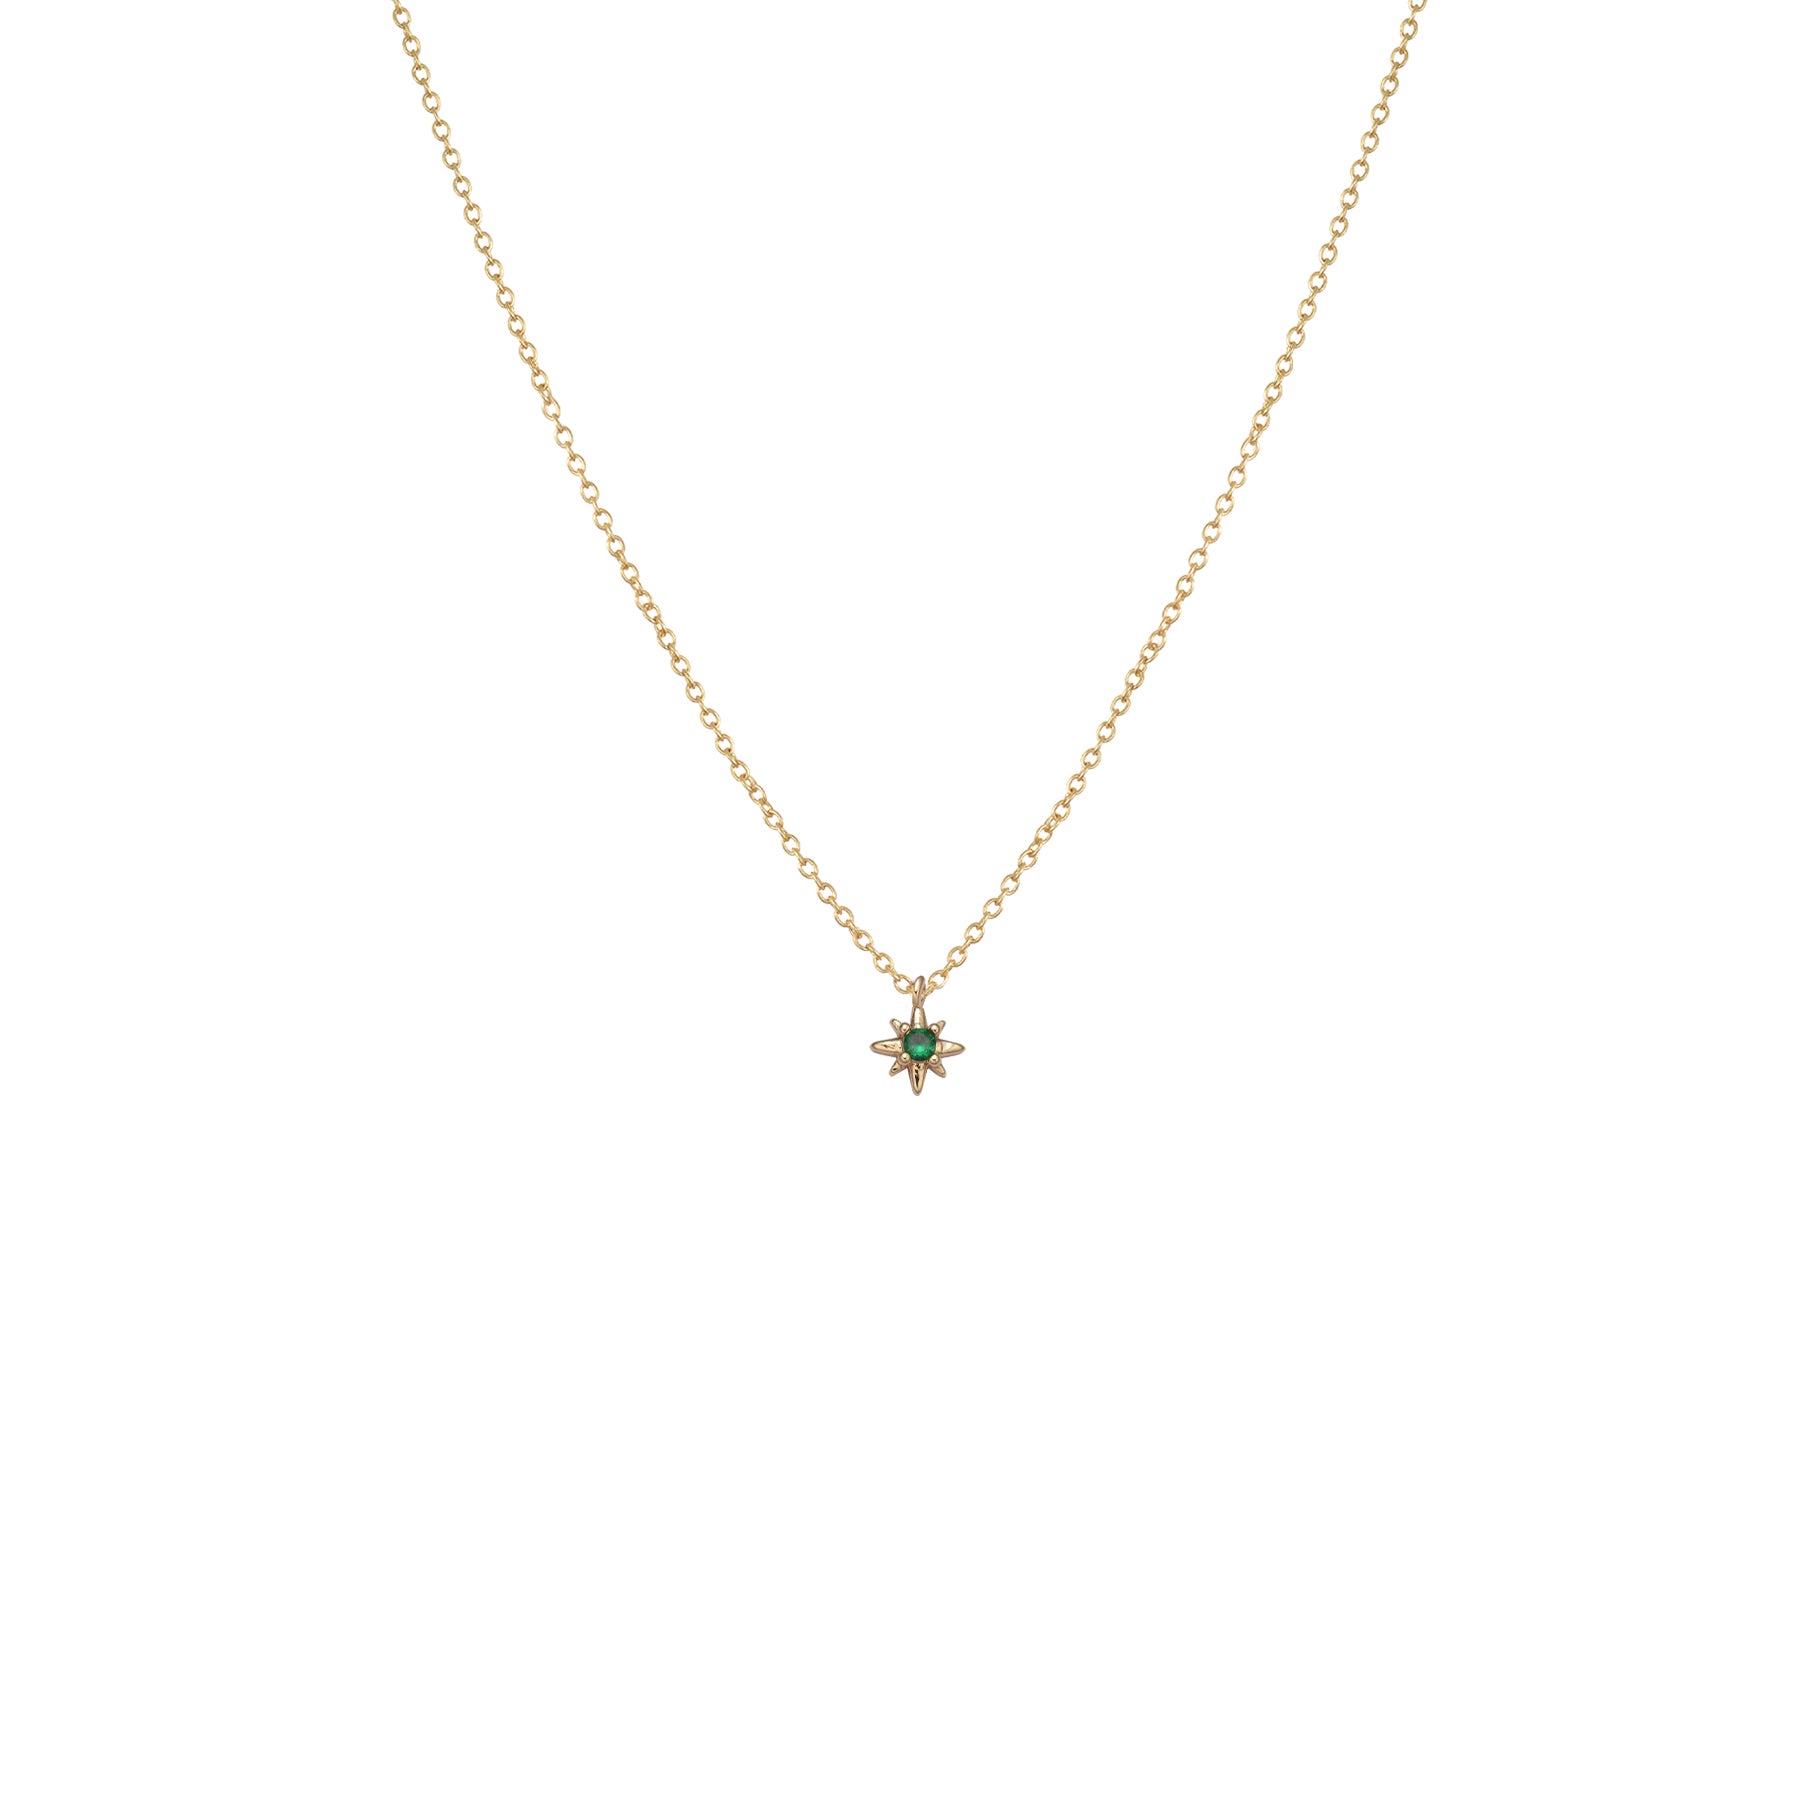 Gold and green sparkling star necklace